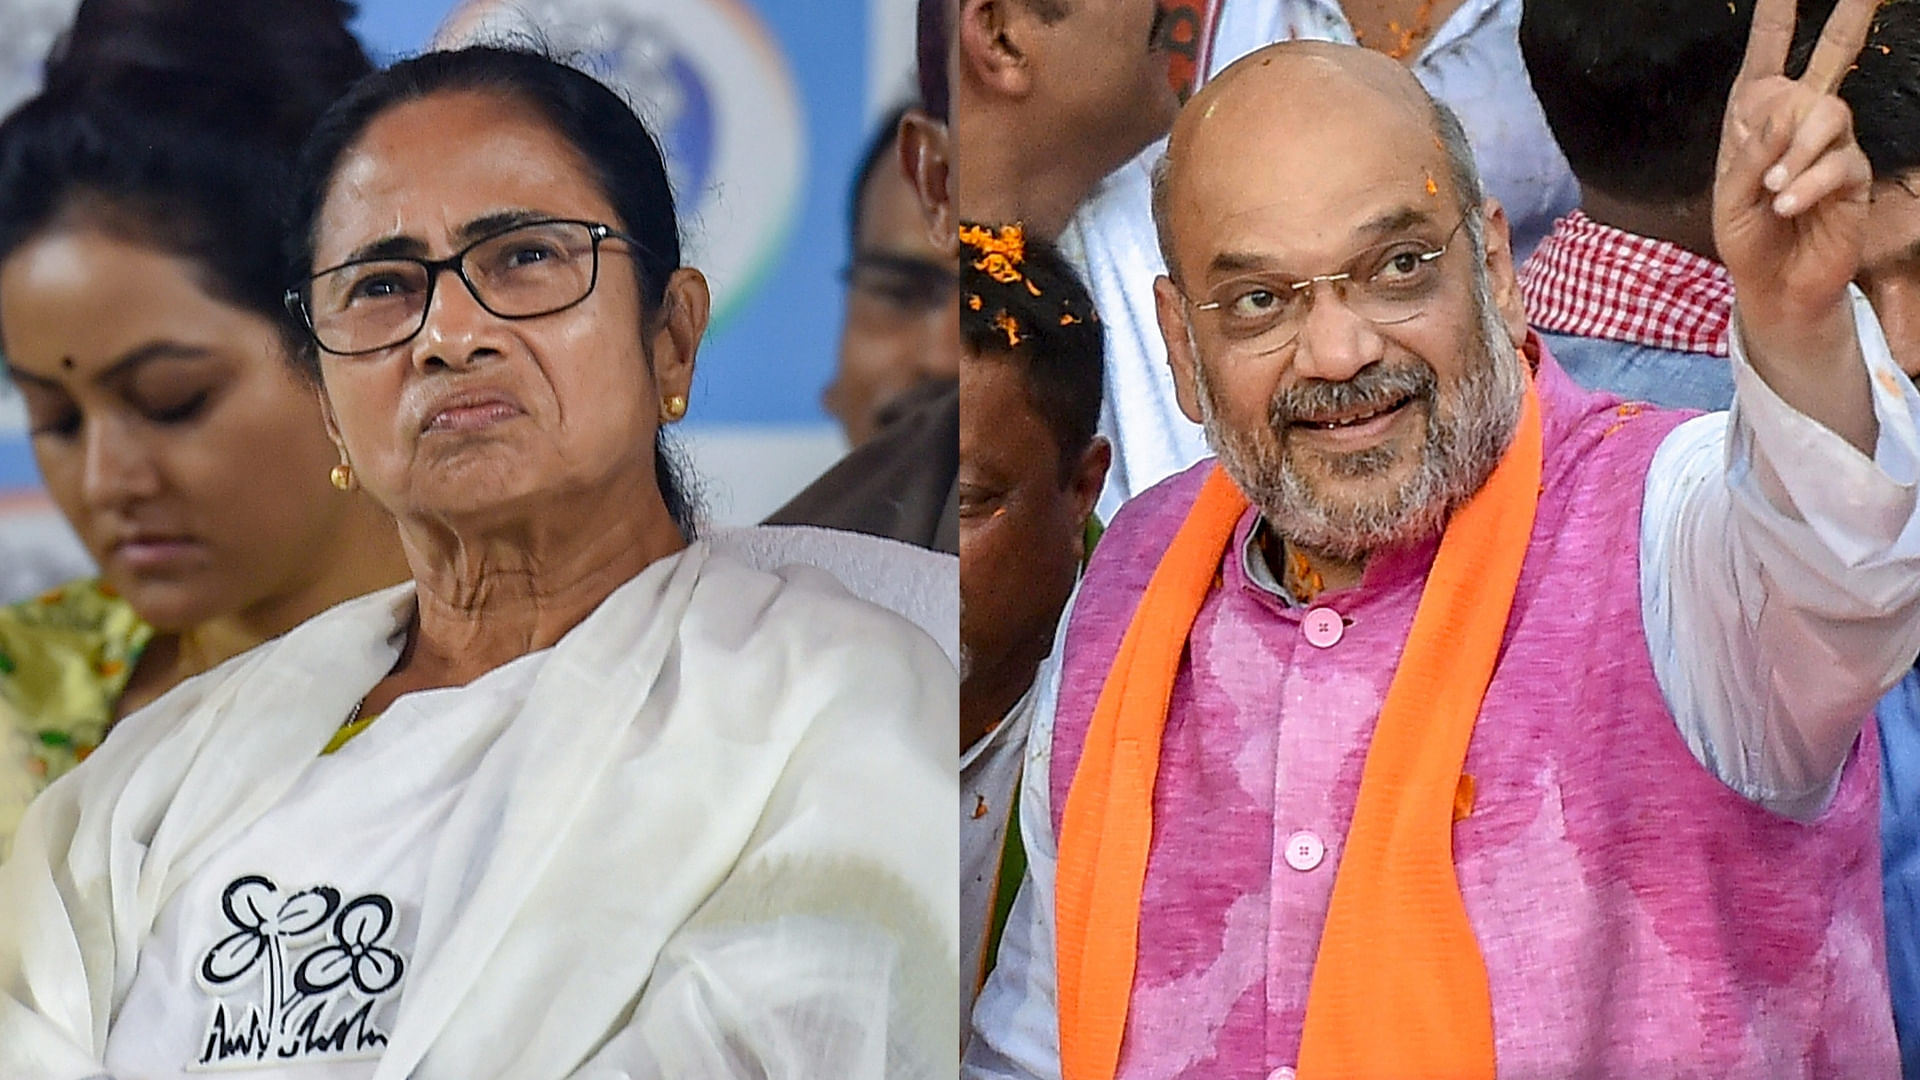 West Bengal Chief Minister Mamata Banerjee and Union Home Minister Amit Shah.